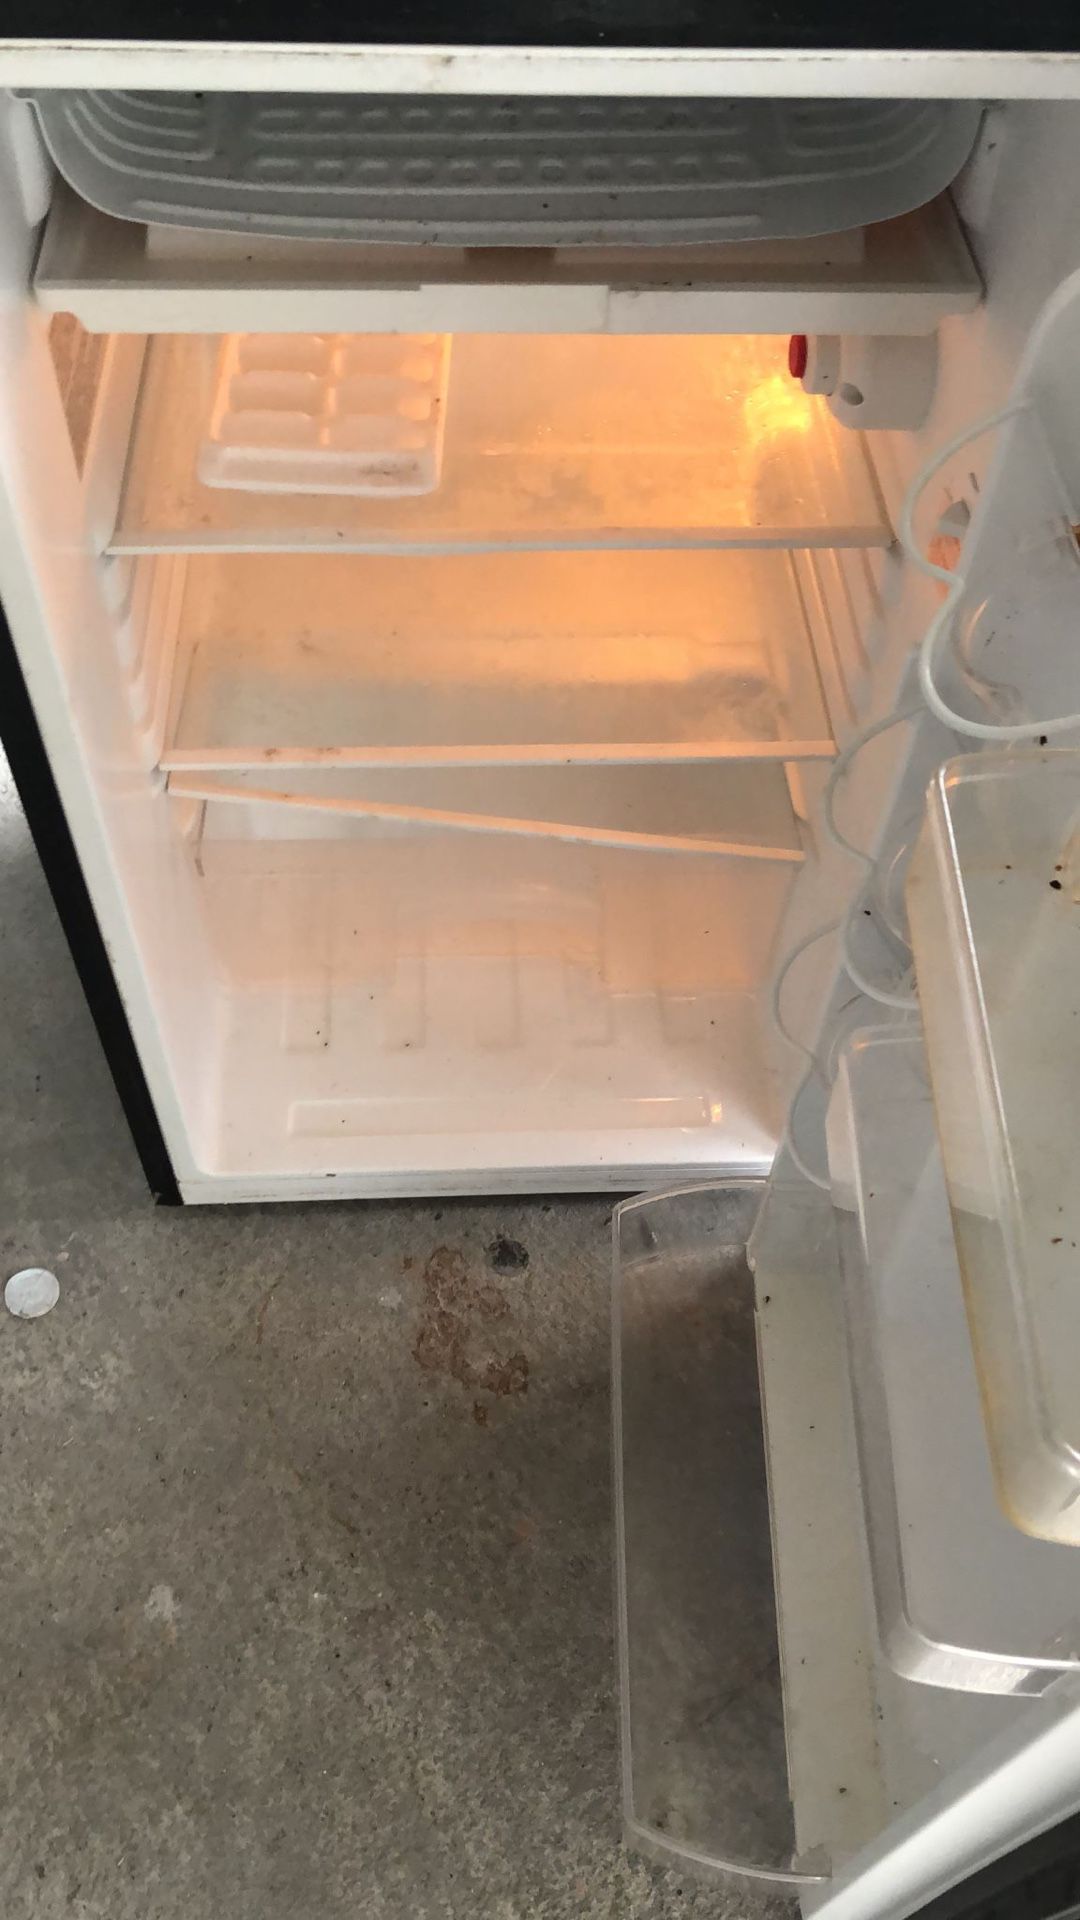 Small Refrigerator With Compact Freezer Space for Sale in Miami, FL -  OfferUp